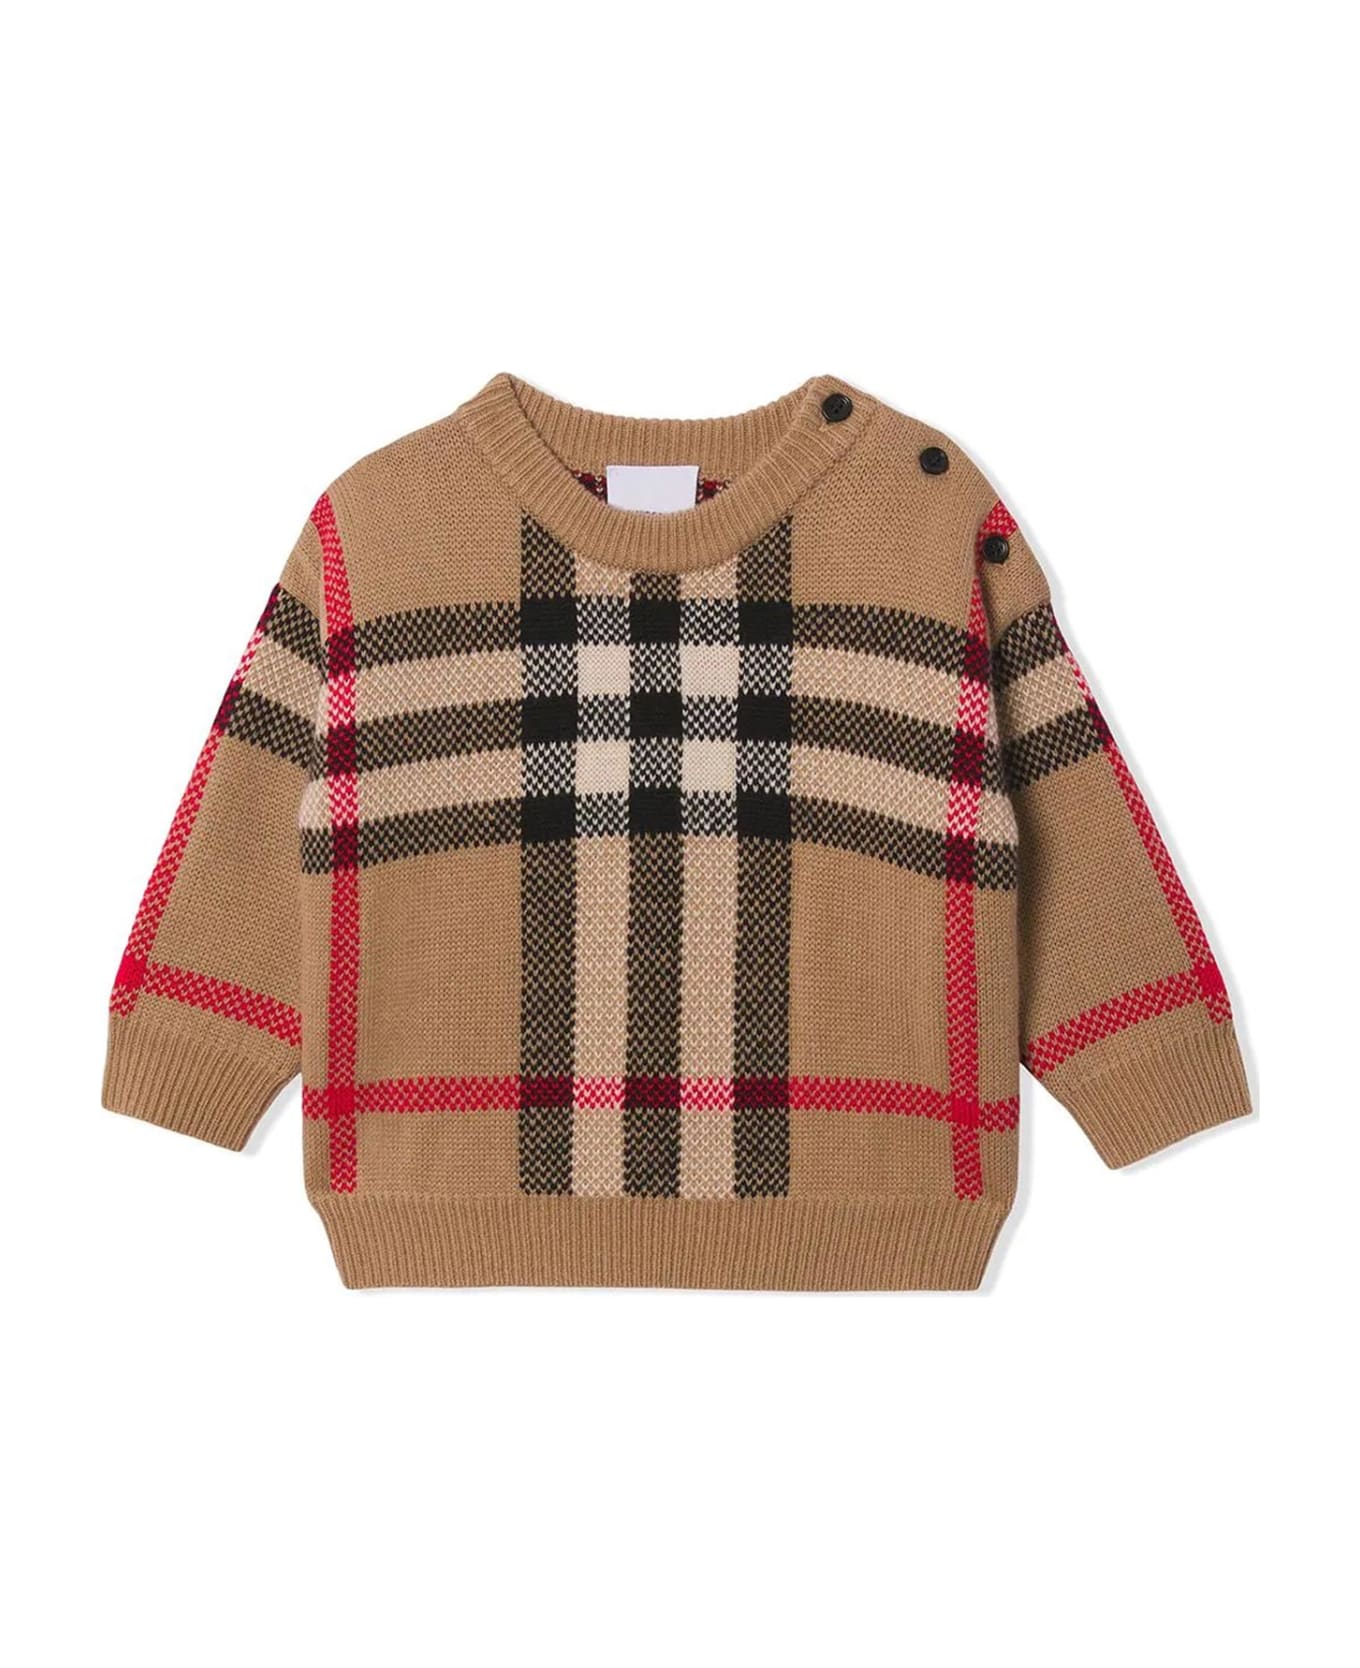 Burberry Sweater With Check Pattern - Beige